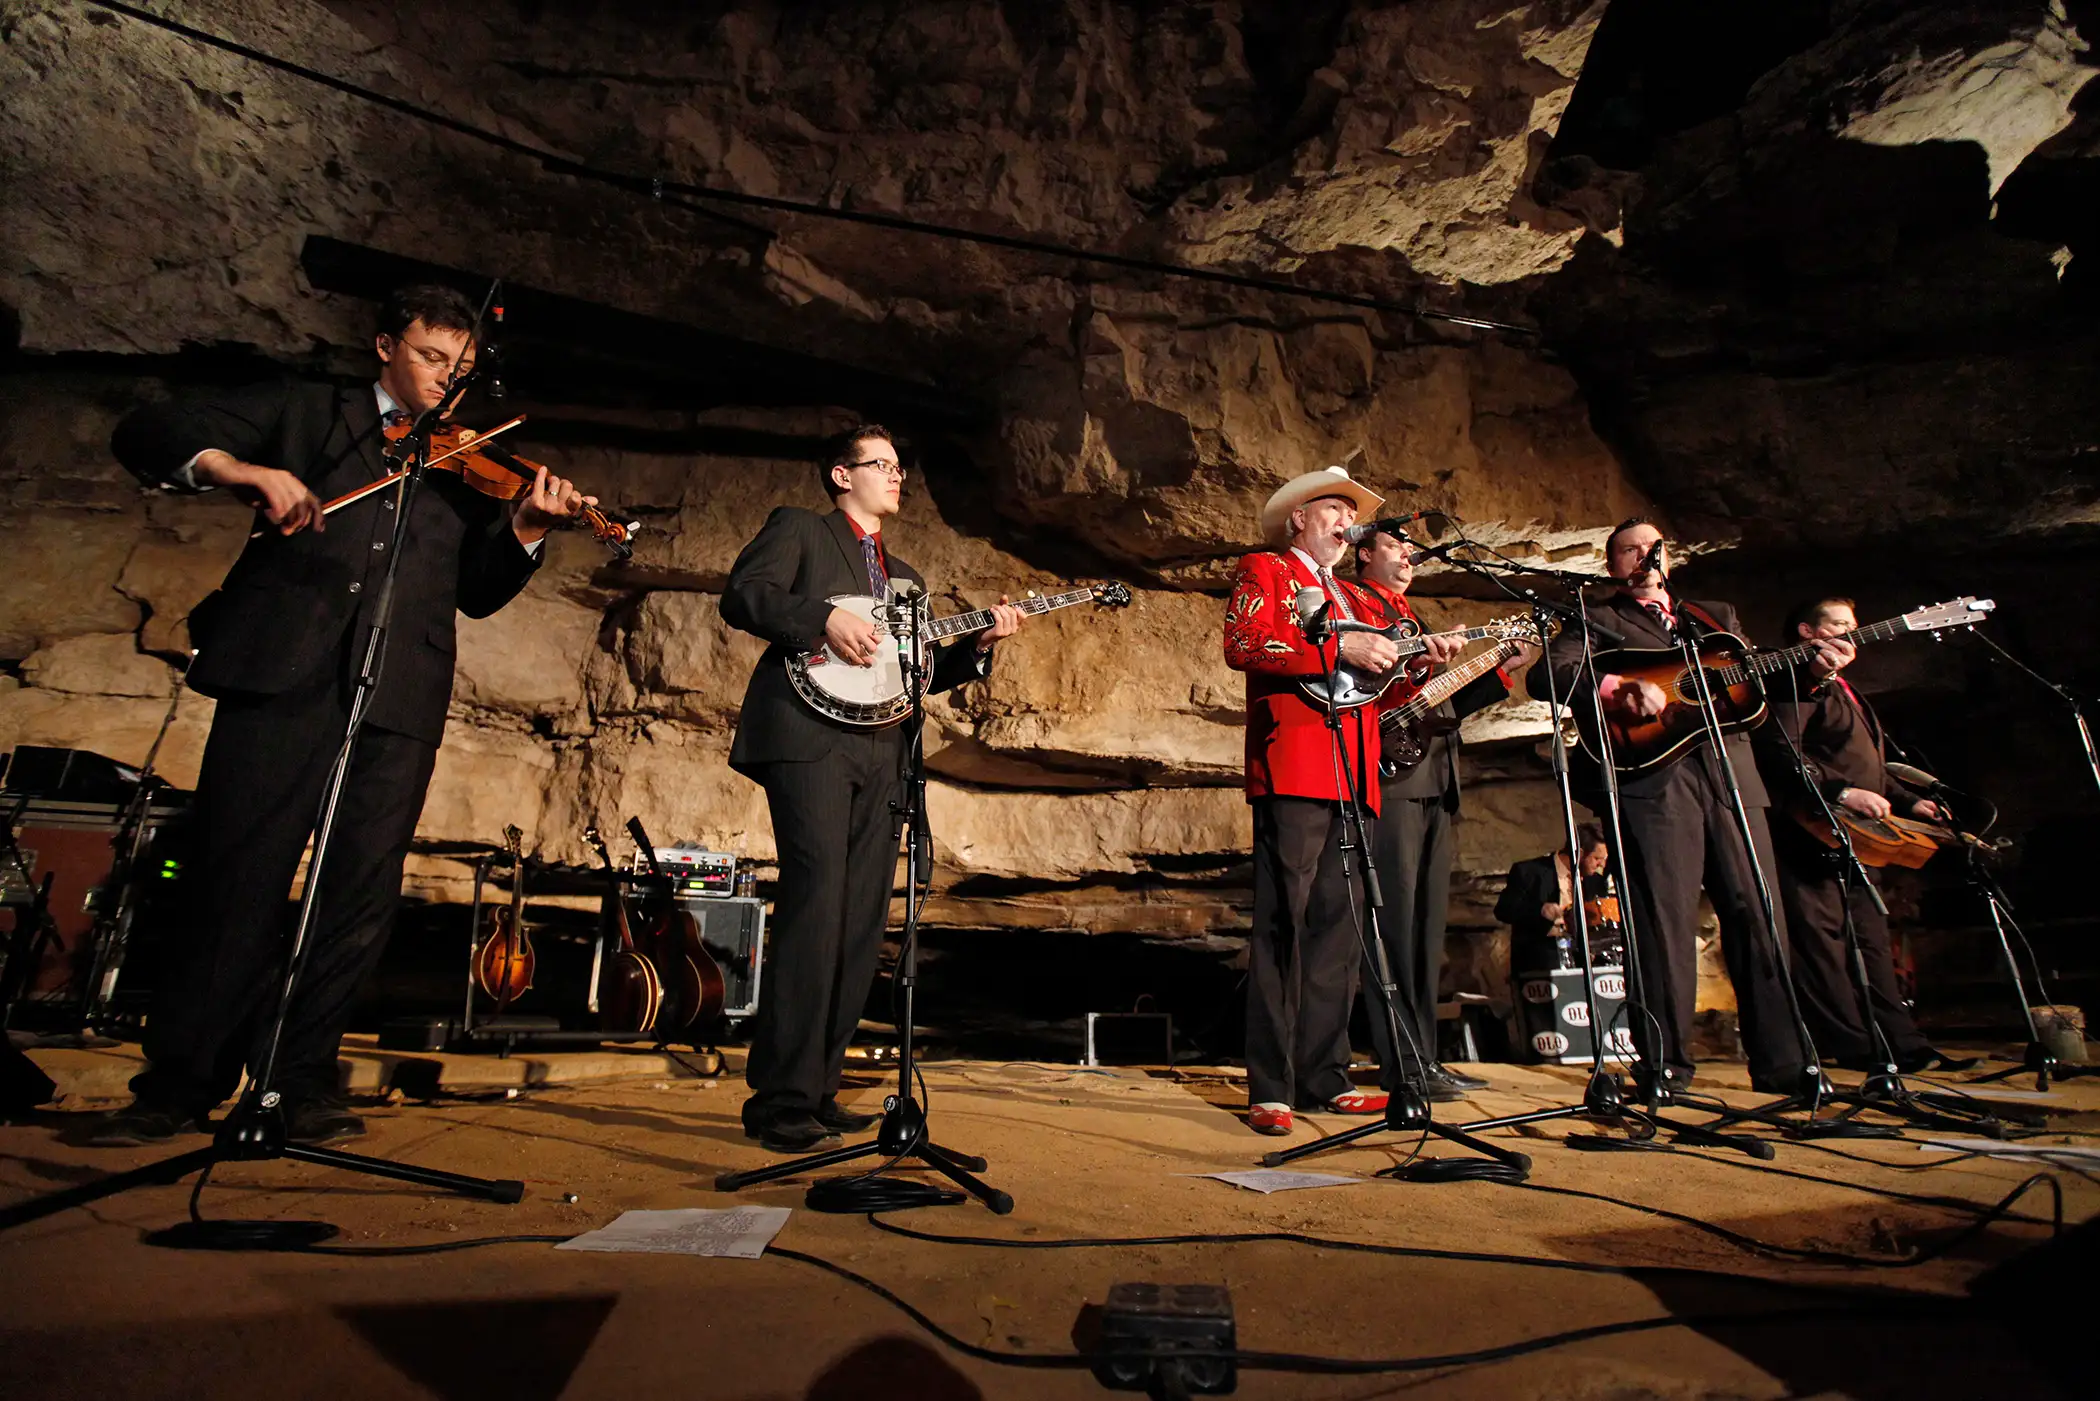 In this July 26, 2011 photo, Doyle Lawson, center, and Quicksilver perform in the Volcano Room at Cumberland Caverns, 333 feet below ground, in McMinnville, Tenn. The natural ampitheater is where the Bluegrass Underground radio show is broadcast from once a month.